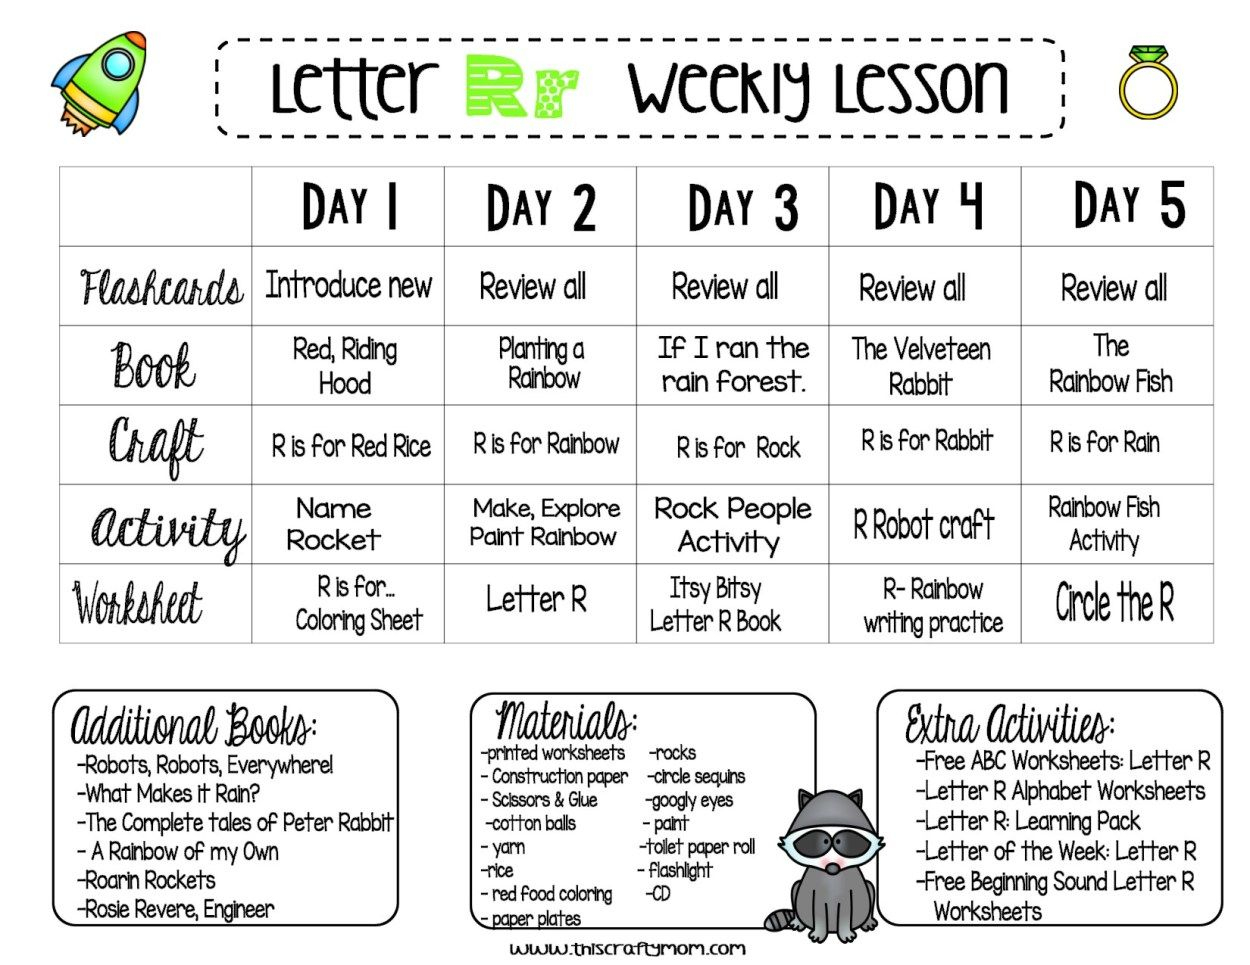 Letter R- Free Preschool Weekly Lesson Plan – Letter Of The